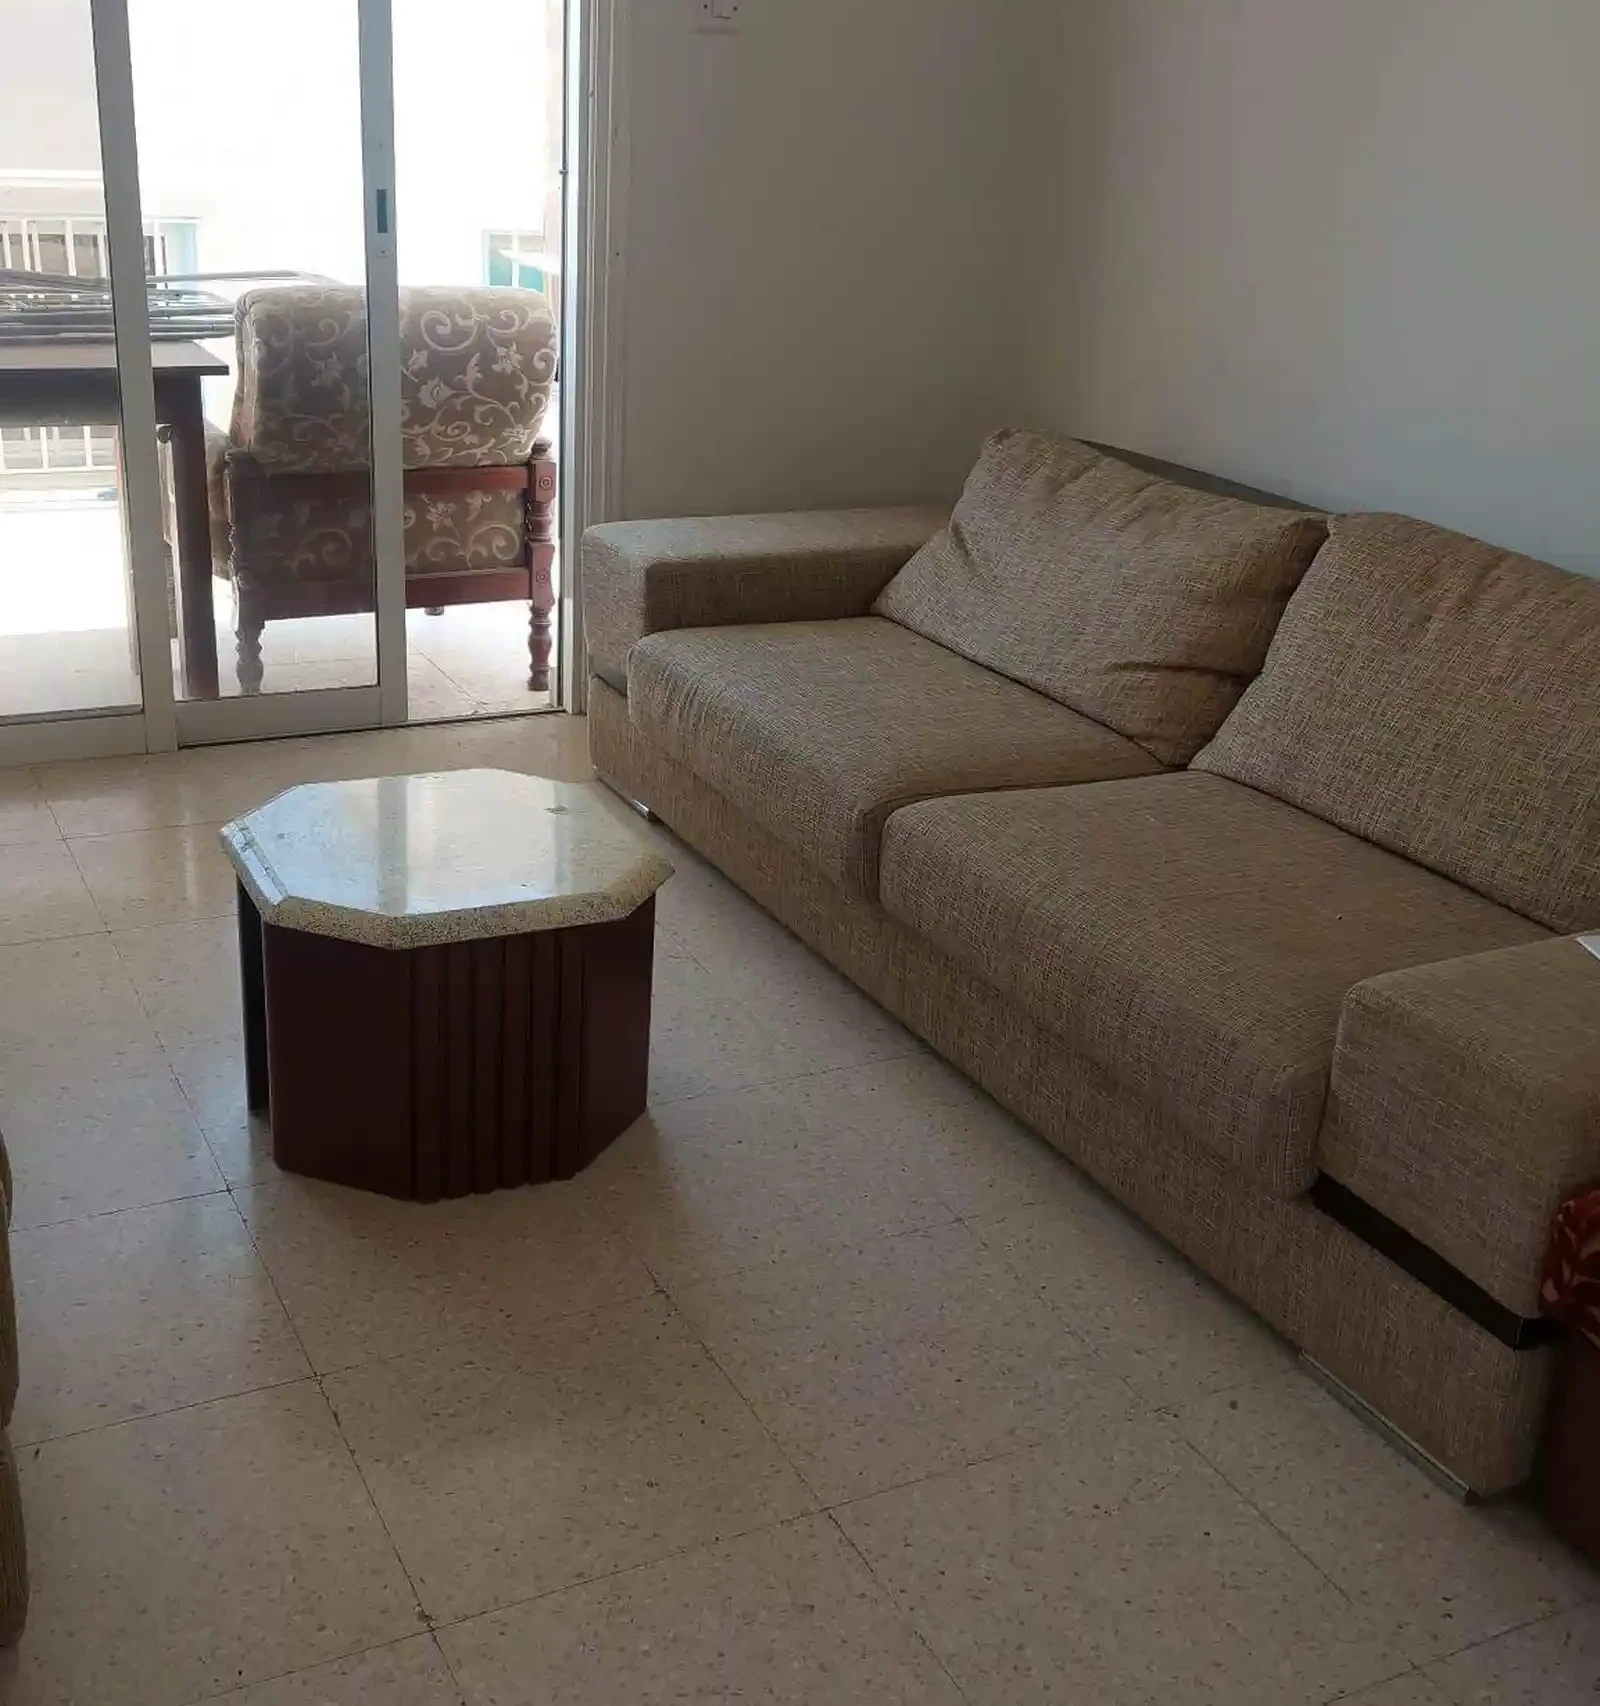 3-bedroom apartment fоr sаle €139.000, image 1